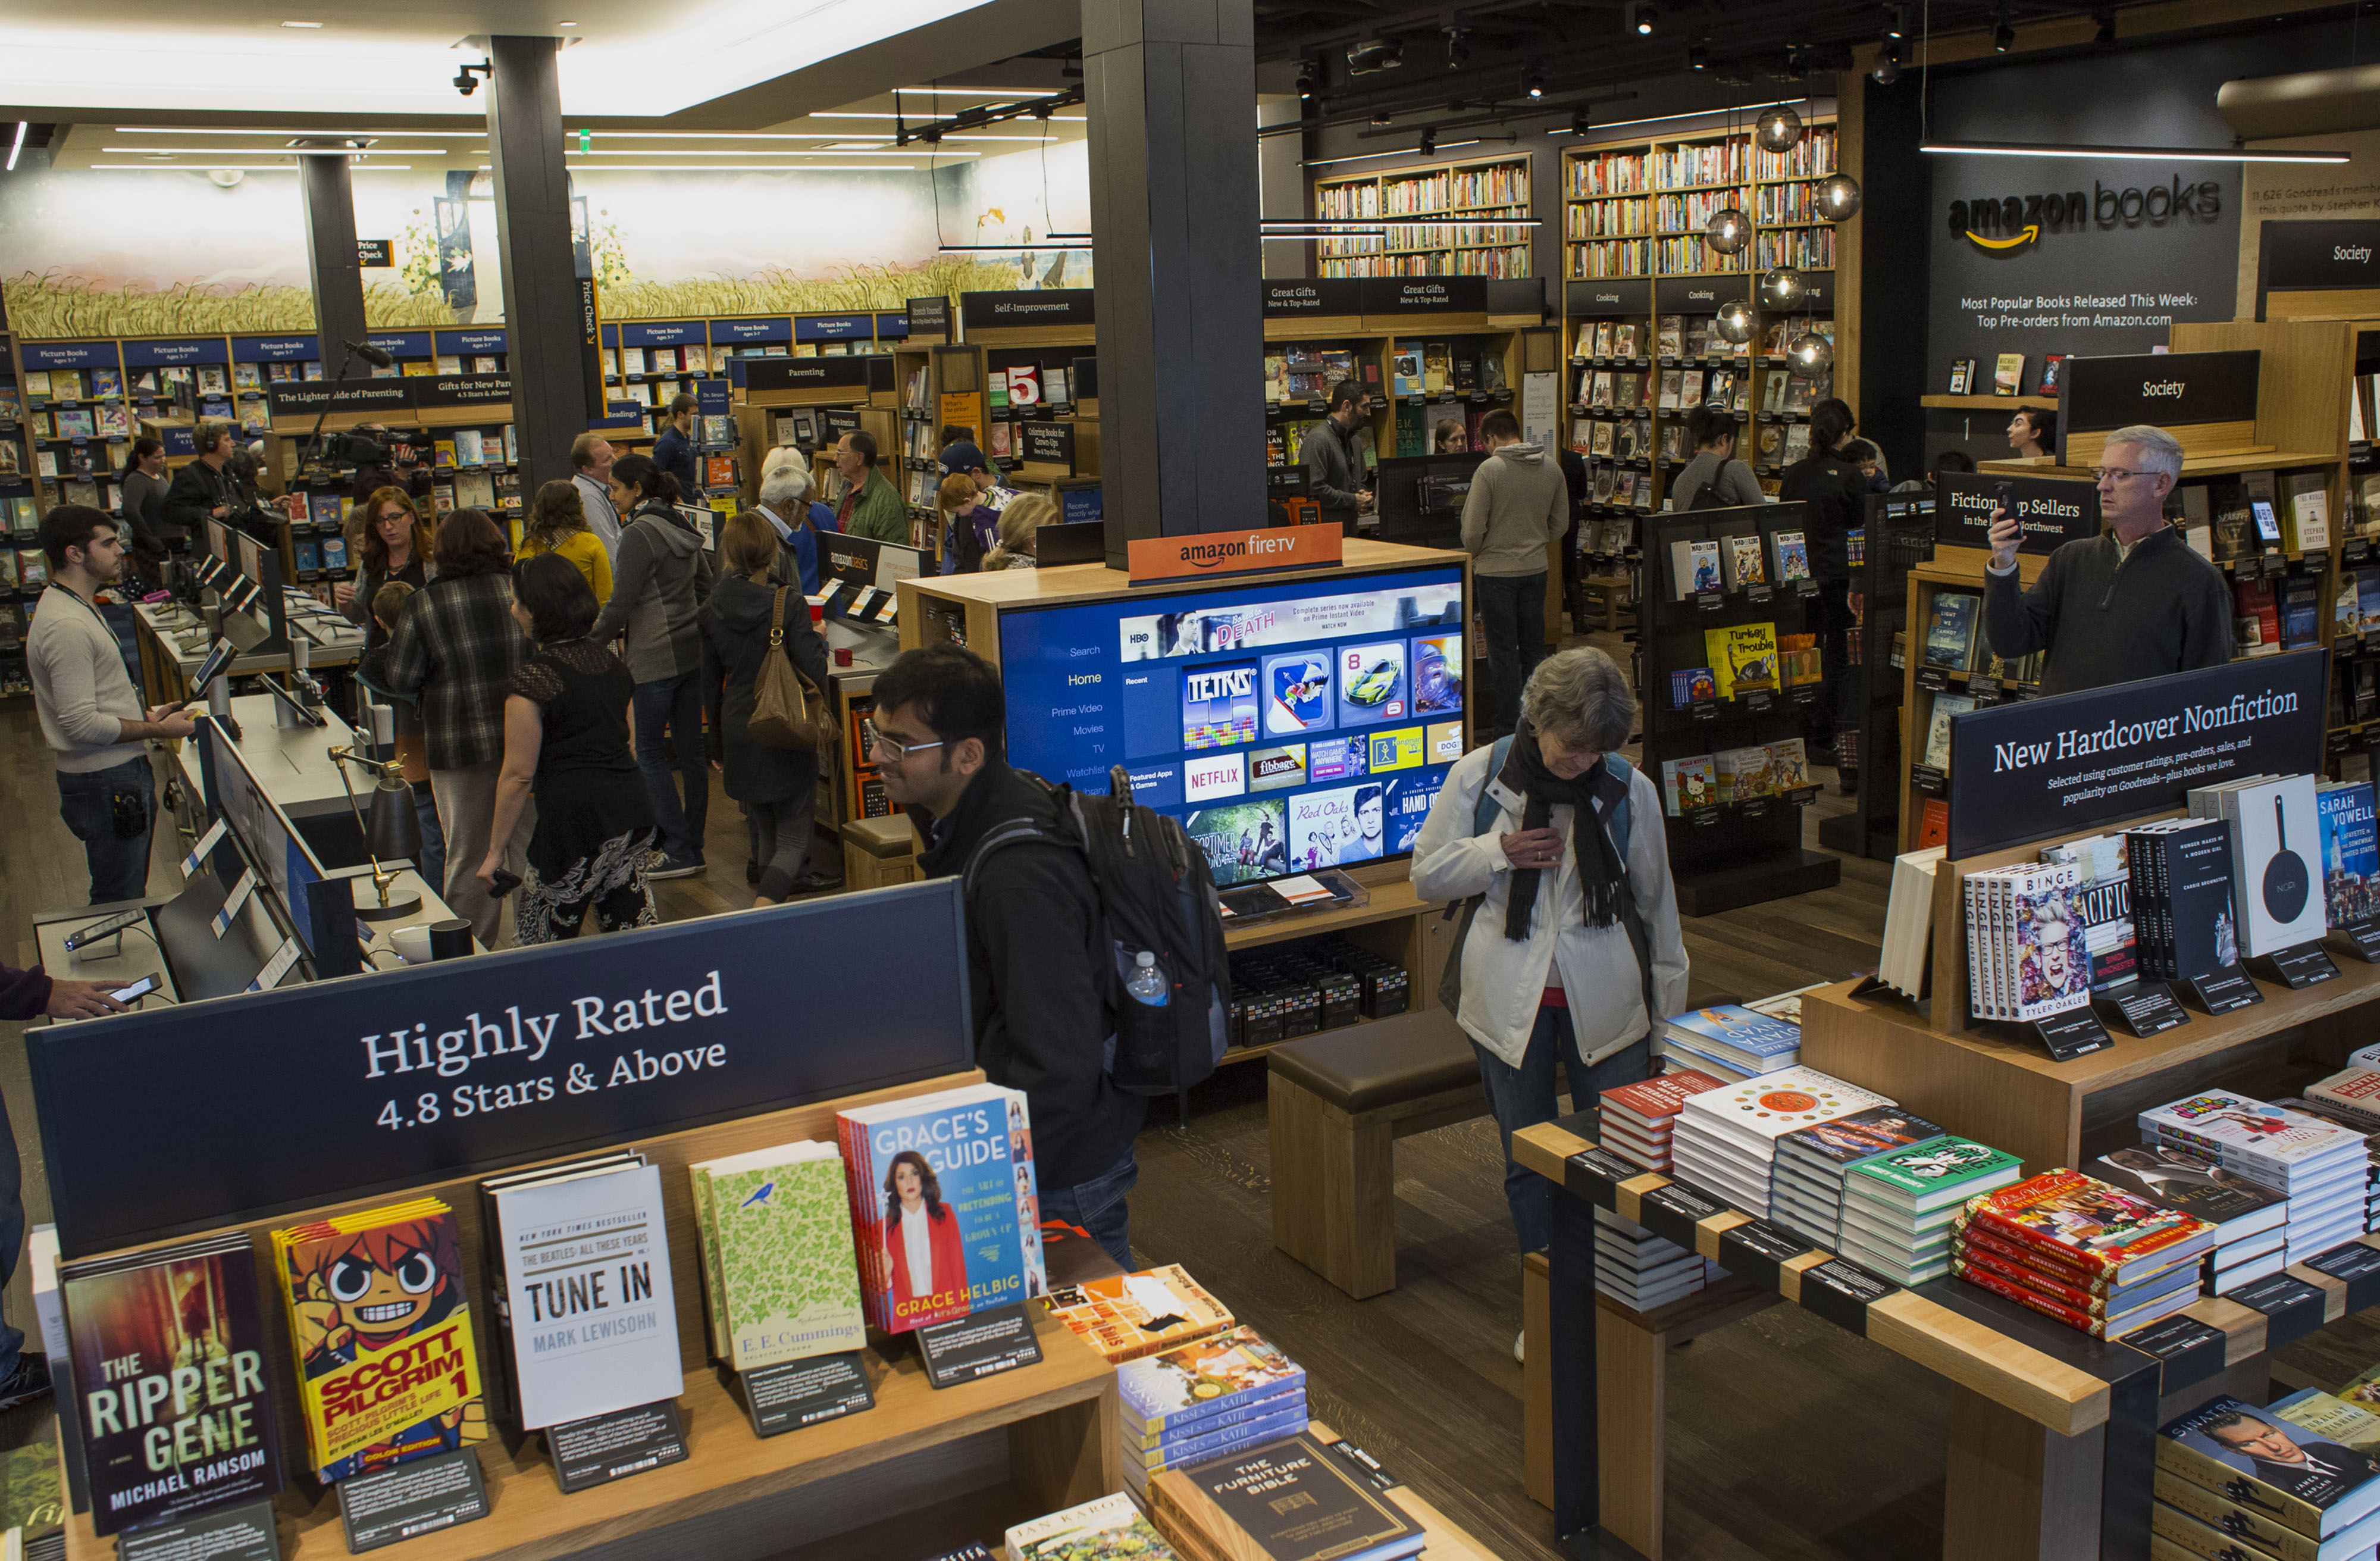 Customers shop inside Amazon Books in Seattle, Washington, on Tuesday, Nov. 3, 2015. The online retailer Amazon.com Inc. opened its first brick-and-mortar location in Seattle's upscale University Village mall. Photographer: Jasper Juinen/Bloomberg (David Ryder—© 2015 Bloomberg Finance LP)